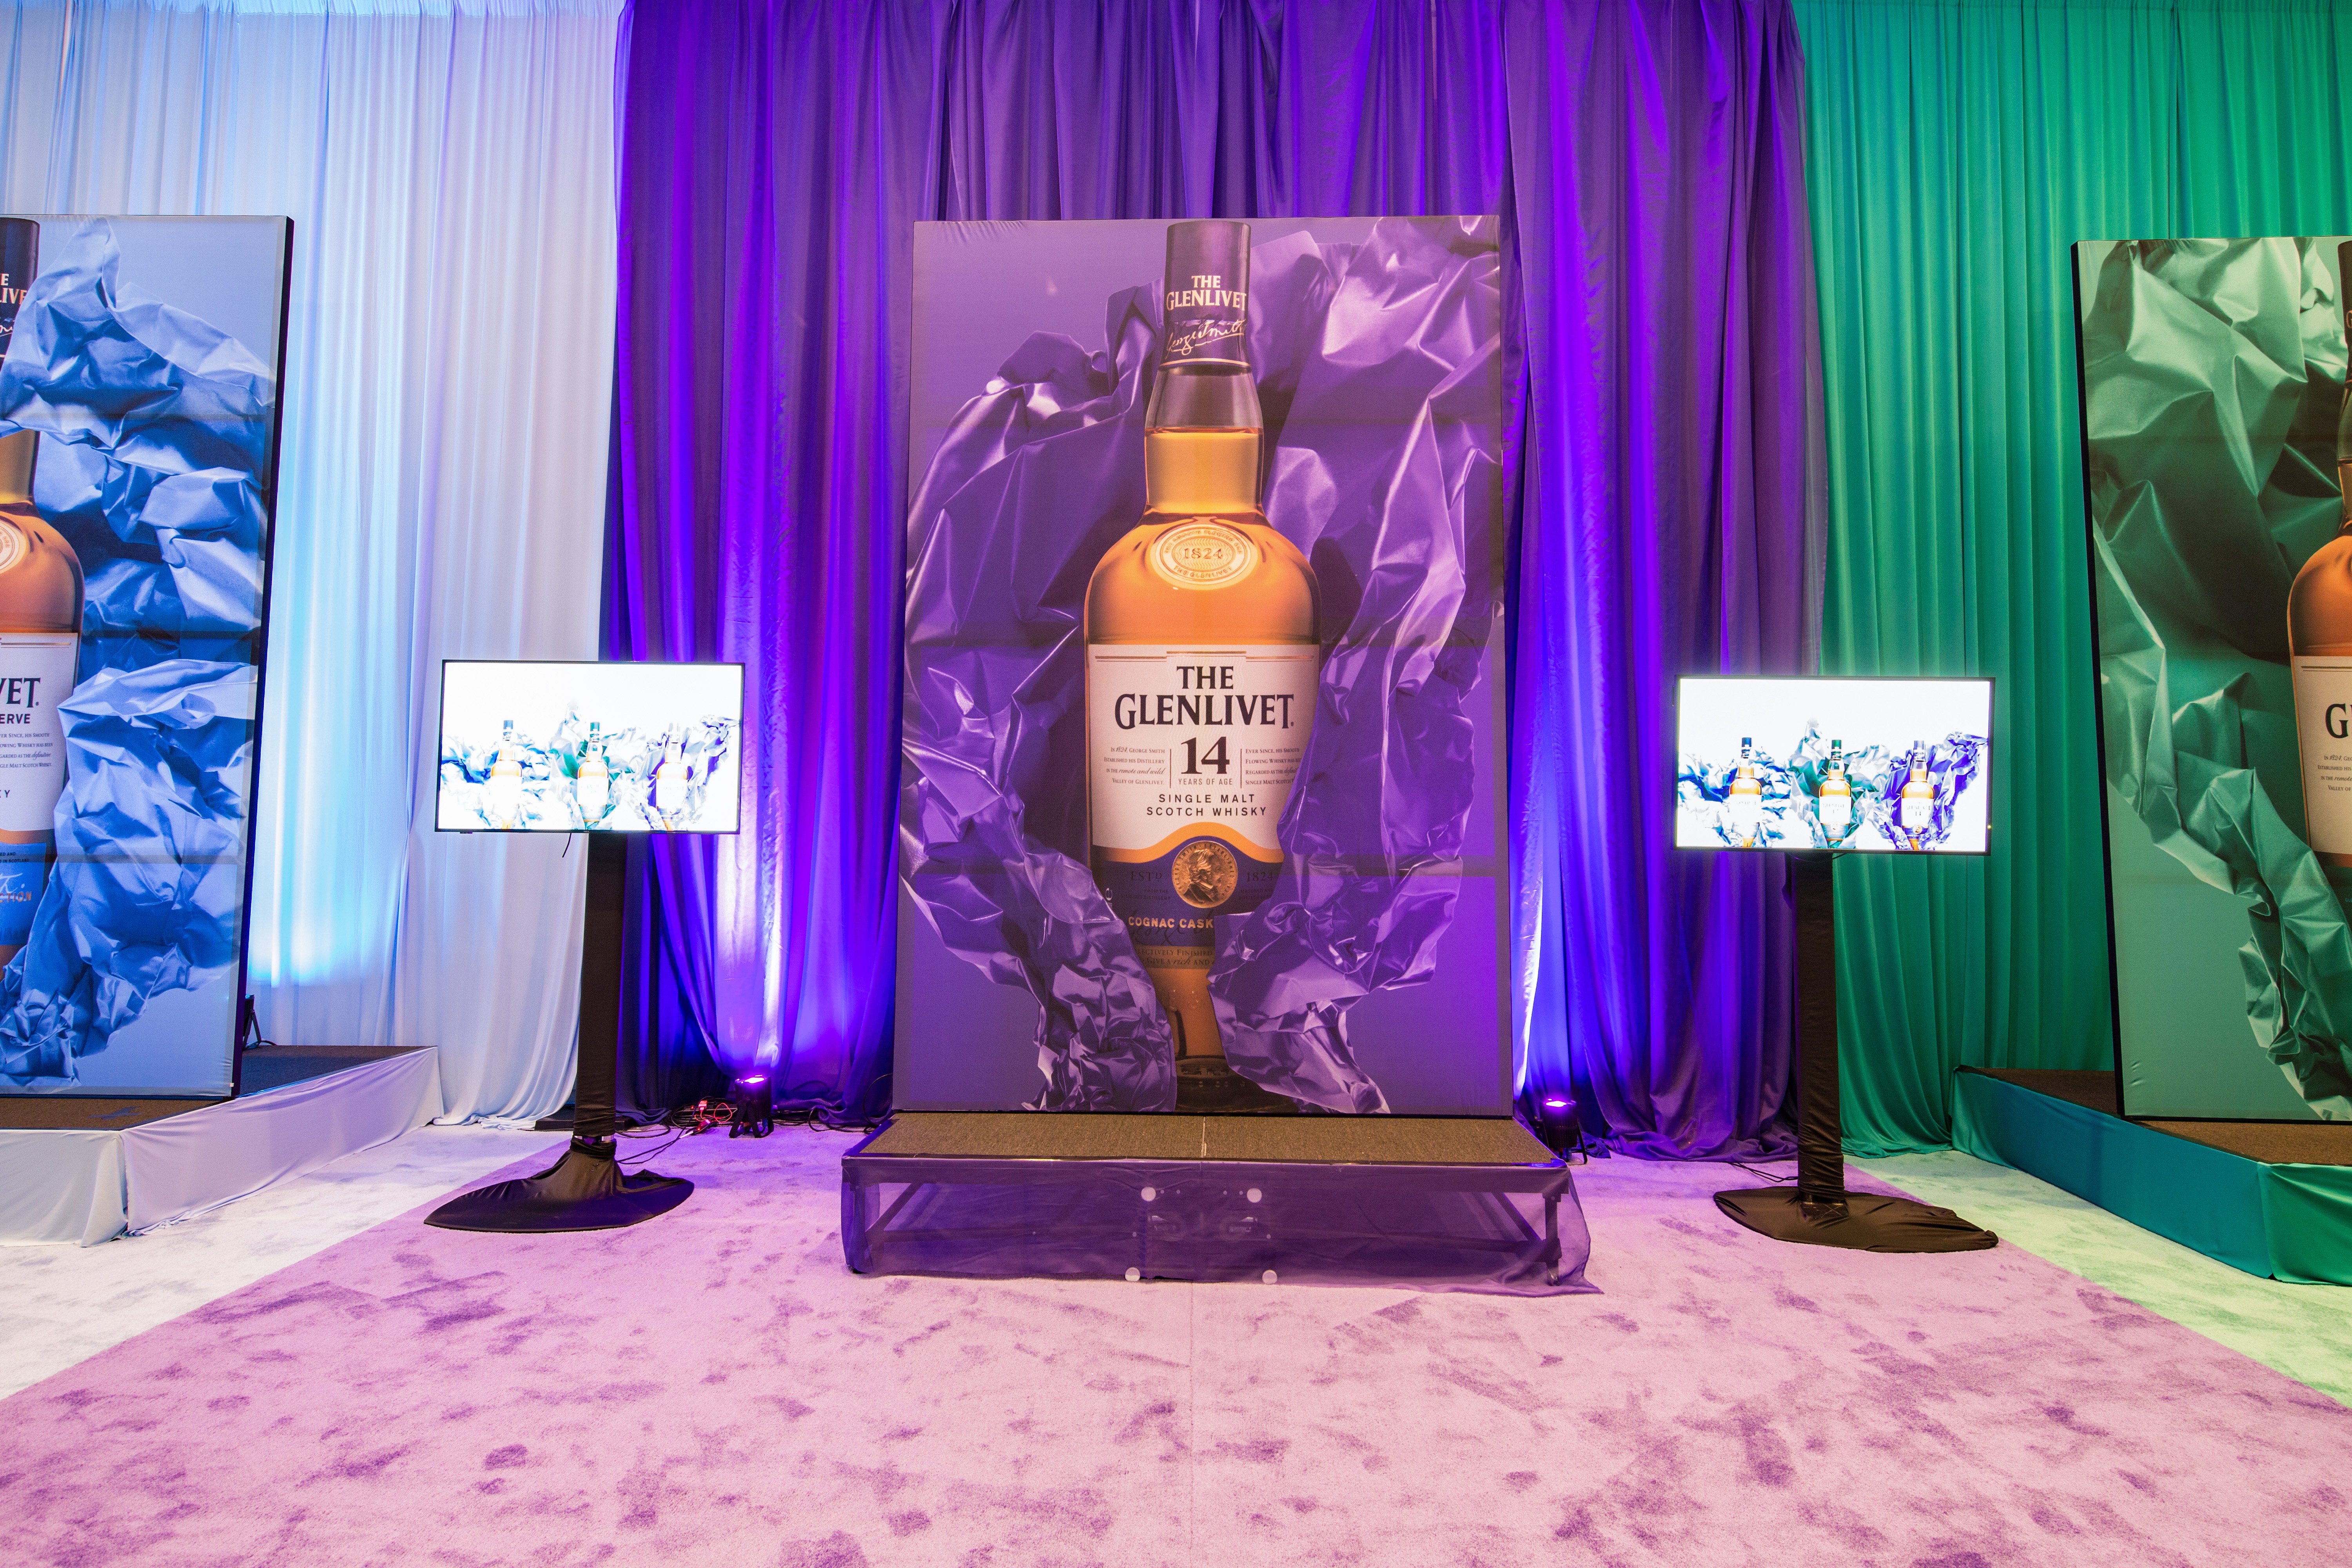 Is fabric or vinyl better for event backdrops?